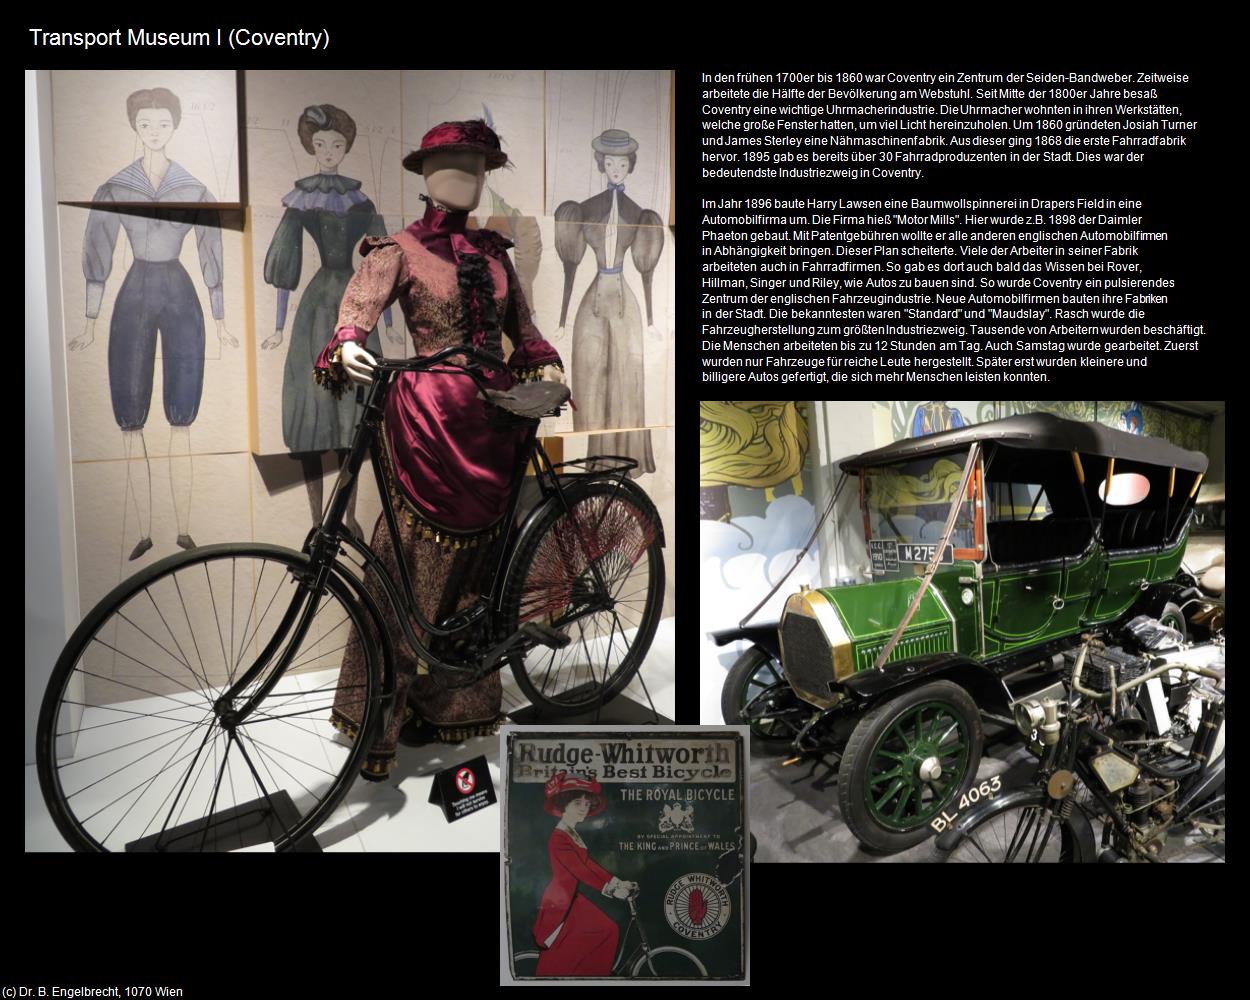 Transport Museum I (Coventry, England      ) in Kulturatlas-ENGLAND und WALES